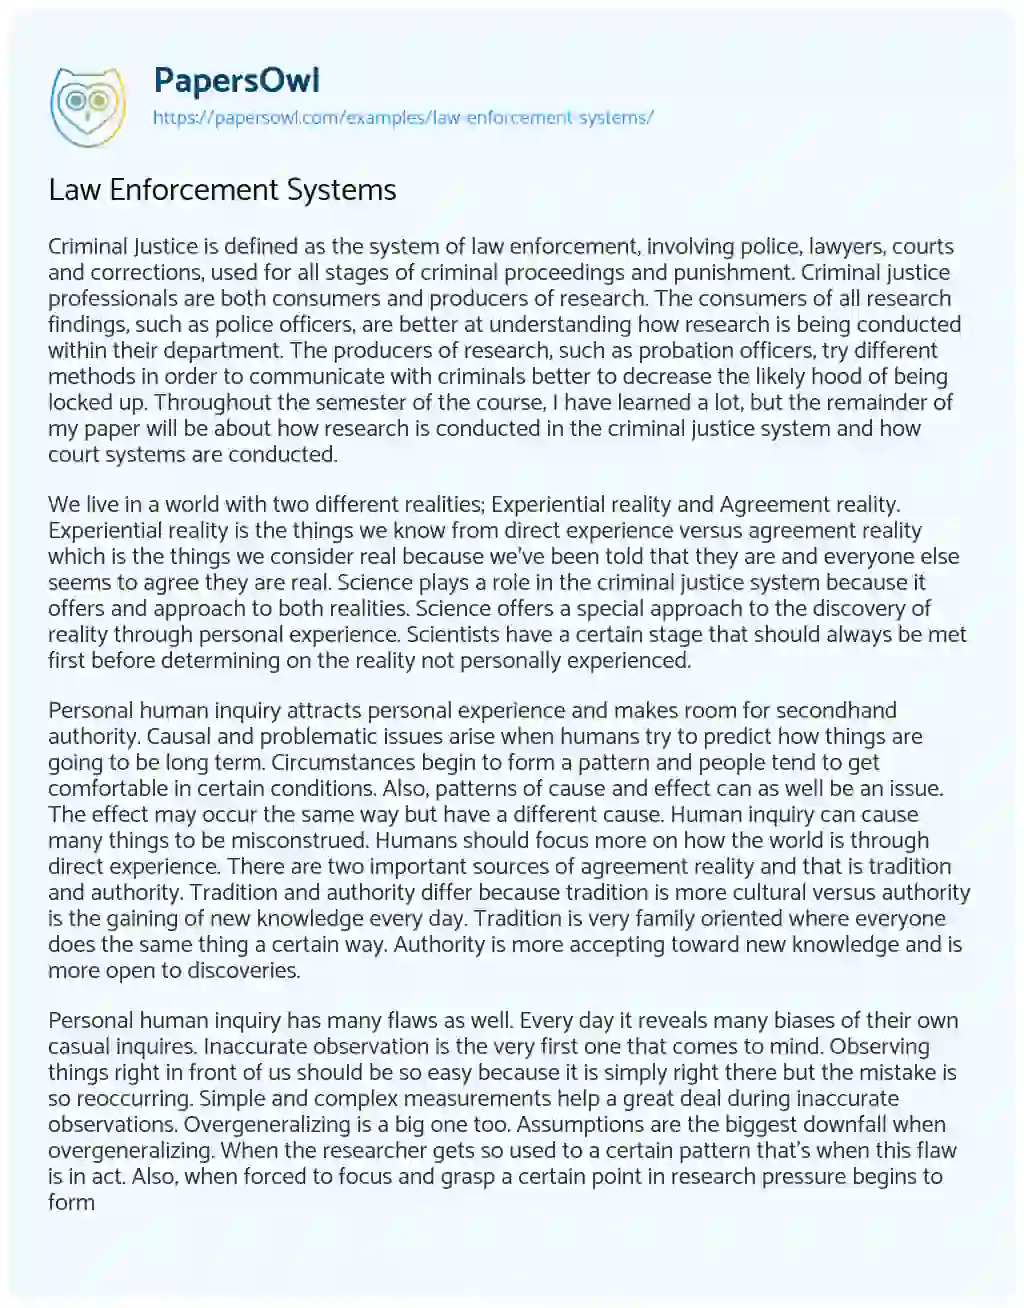 Essay on Law Enforcement Systems